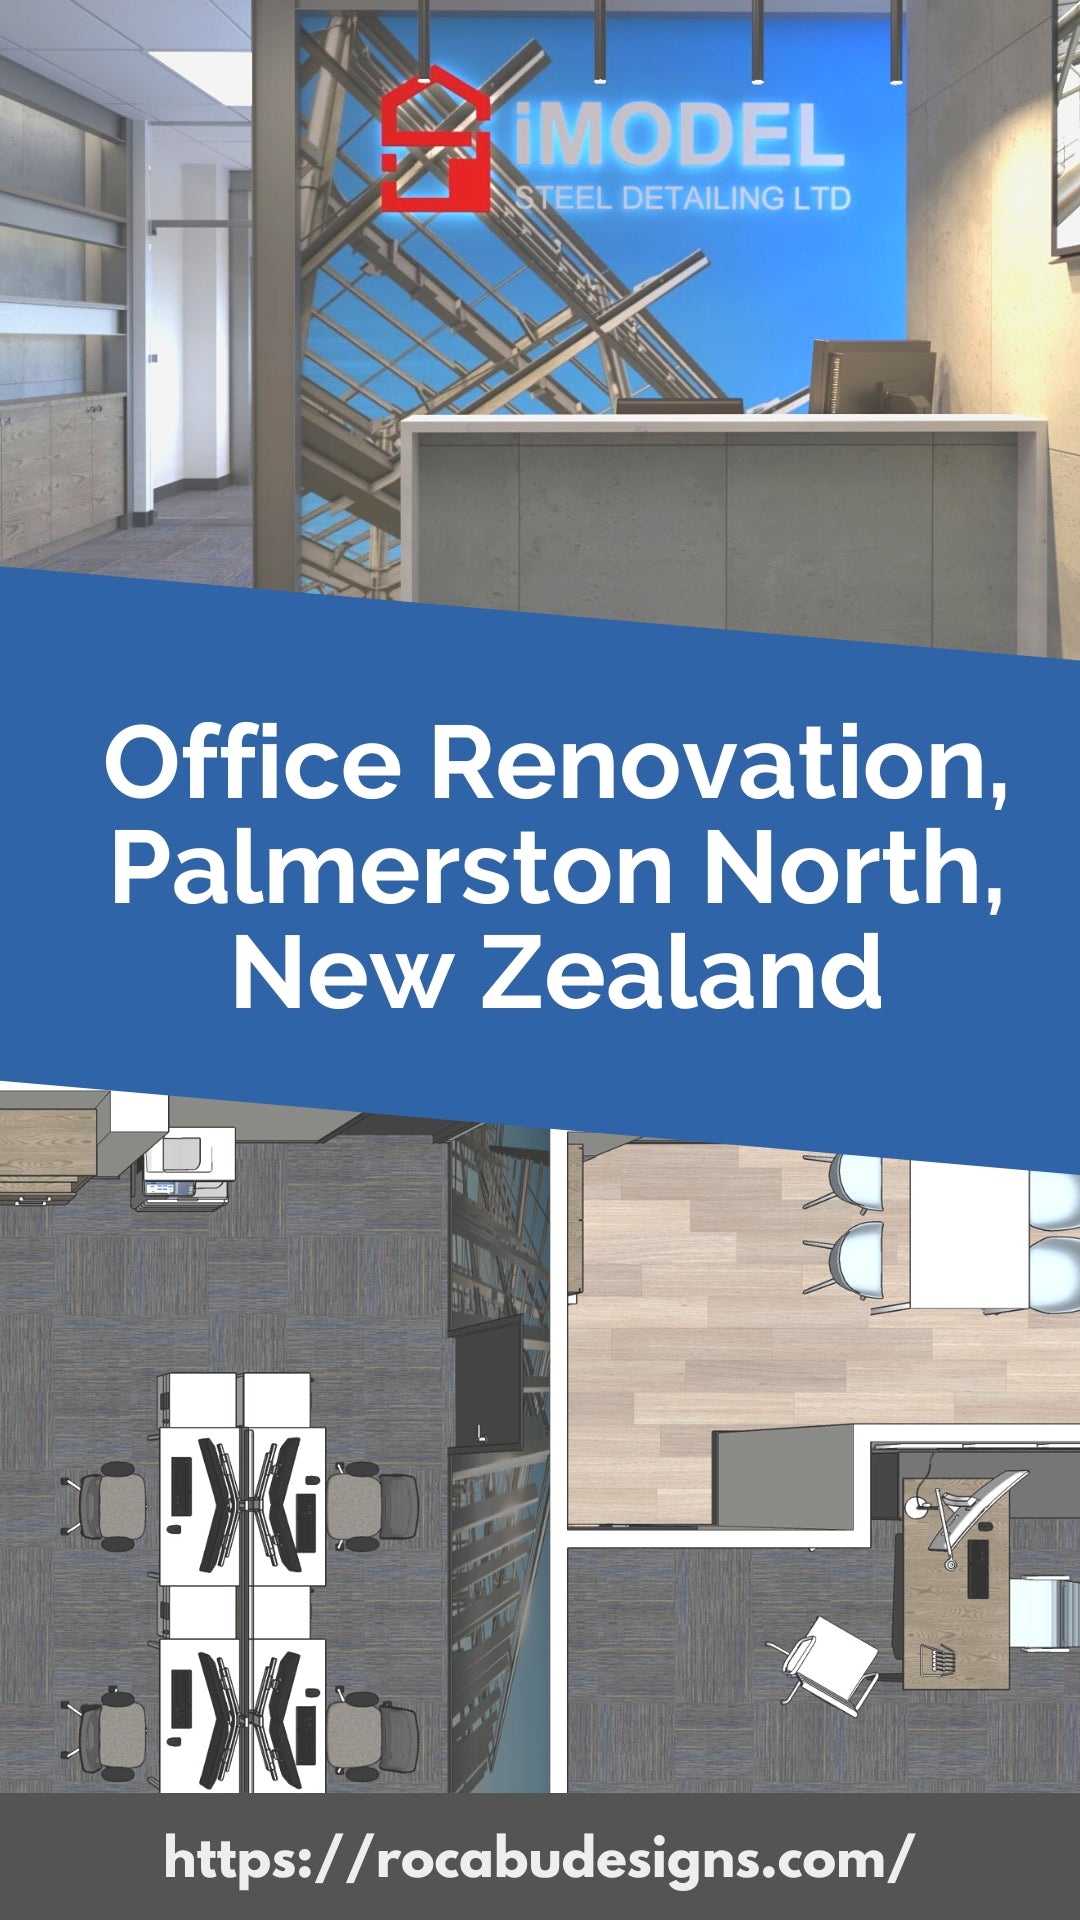 Office Renovation of Imodel Steel Detailing Ltd in Palmerston North, New Zealand